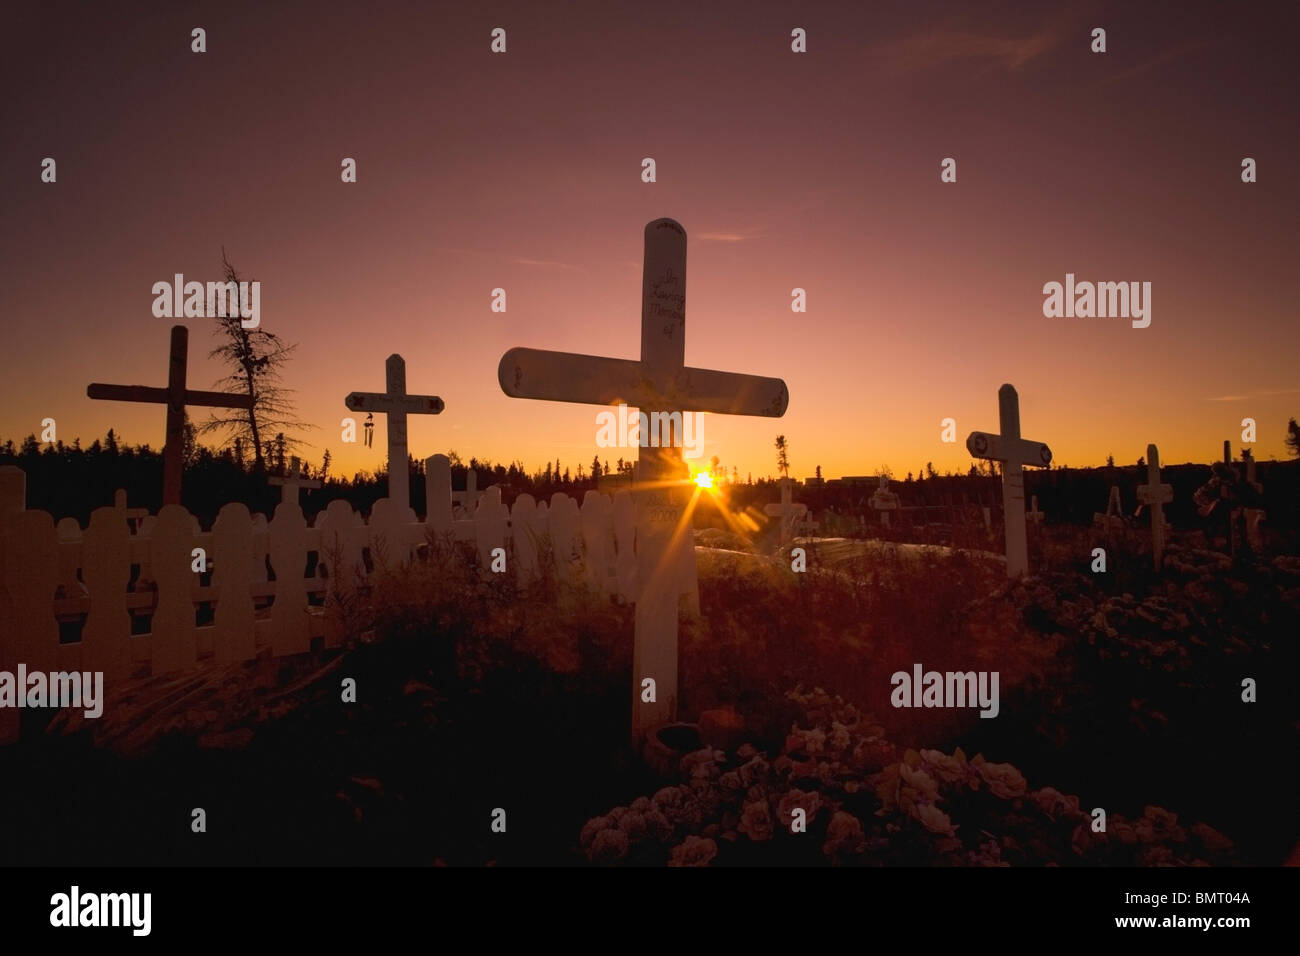 Inuvik, Northwest Territories, Canada; Cemetery In The Arctic At Sunset Stock Photo